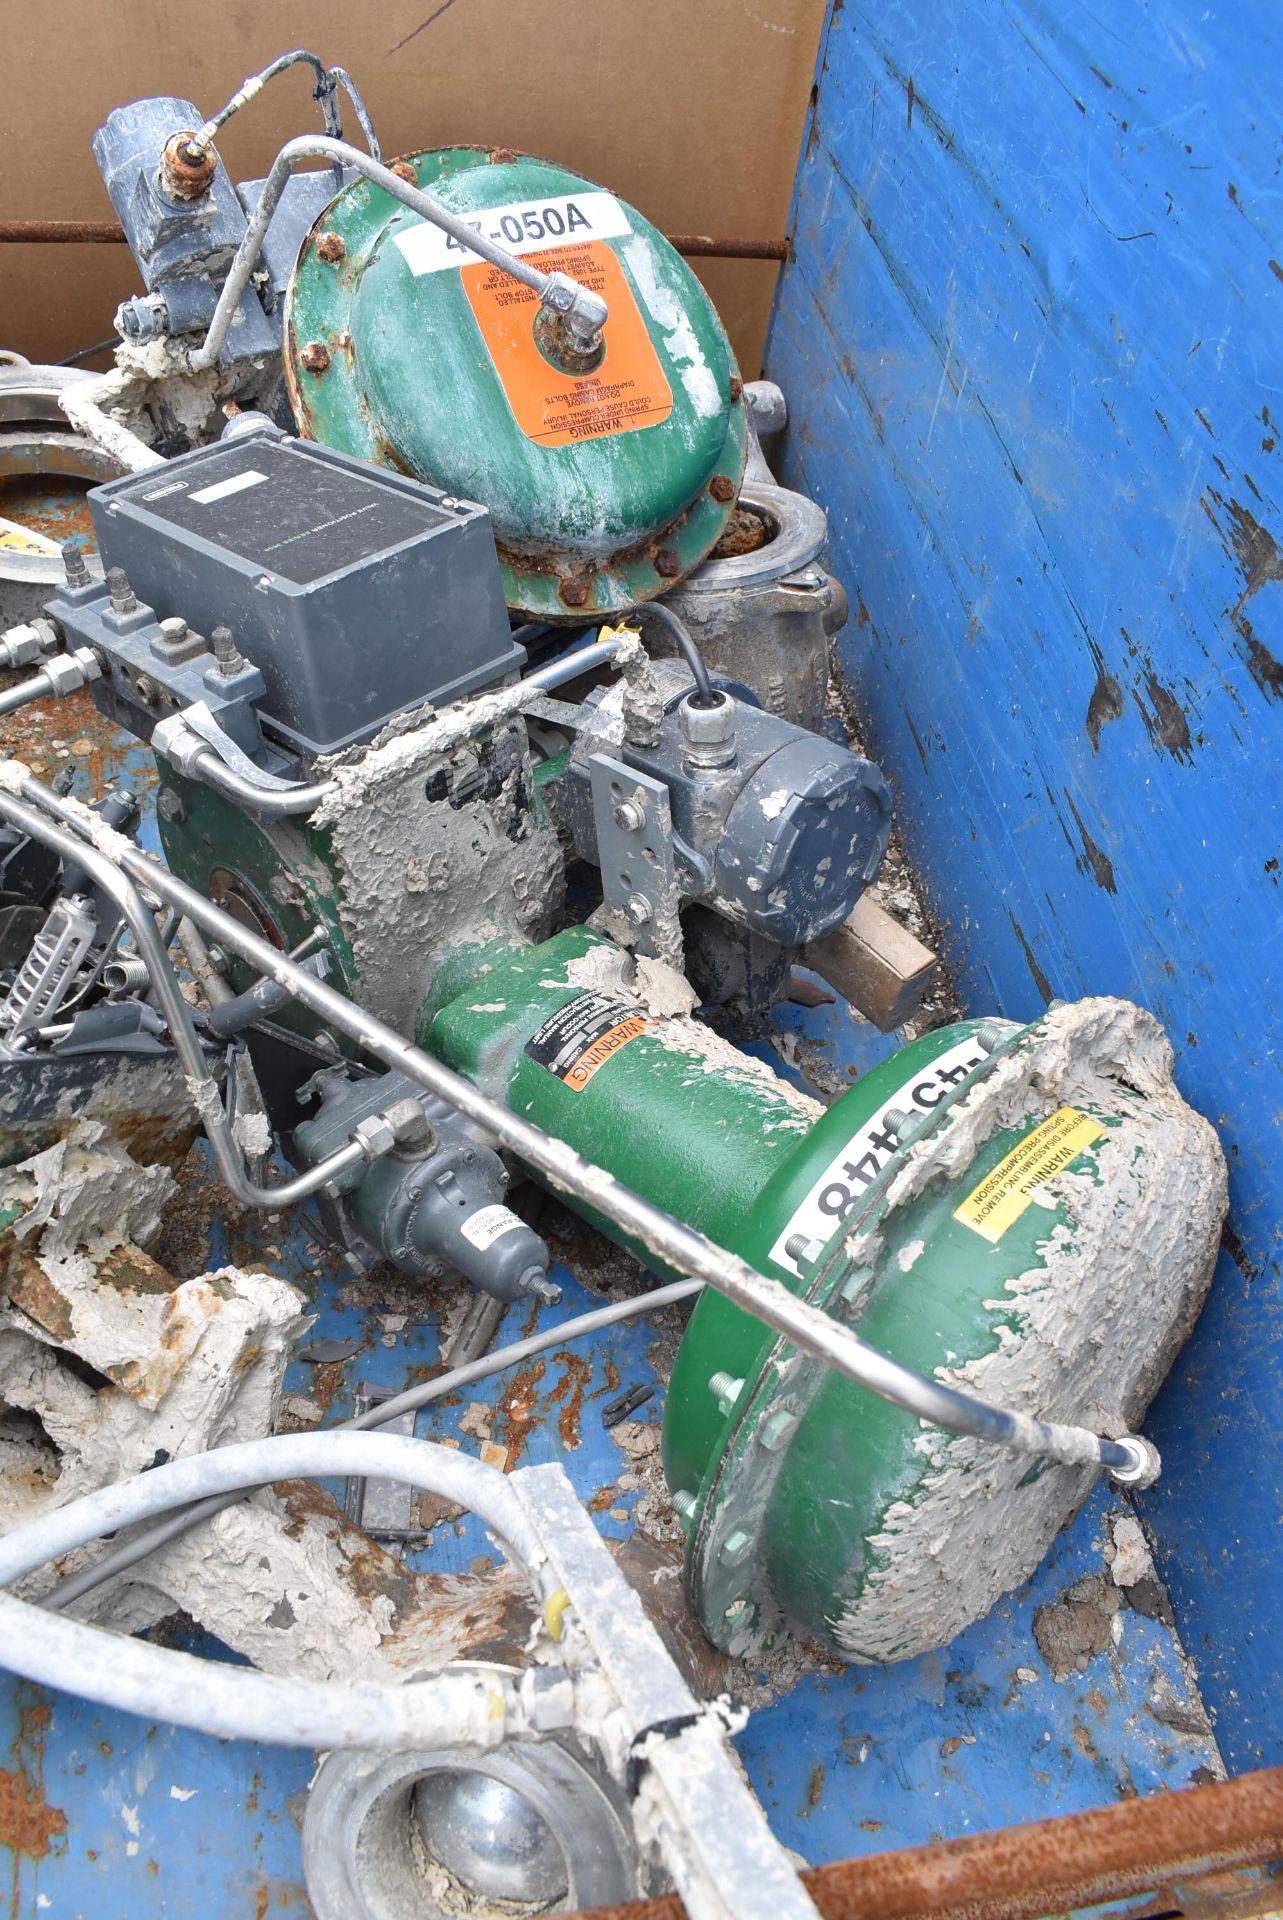 LOT/ CART WITH CONTENTS - FISHER VALVES WITH ACTUATORS, MAGNETIC FLOWMETERS, KNIFE VALVES [RIGGING - Image 4 of 5